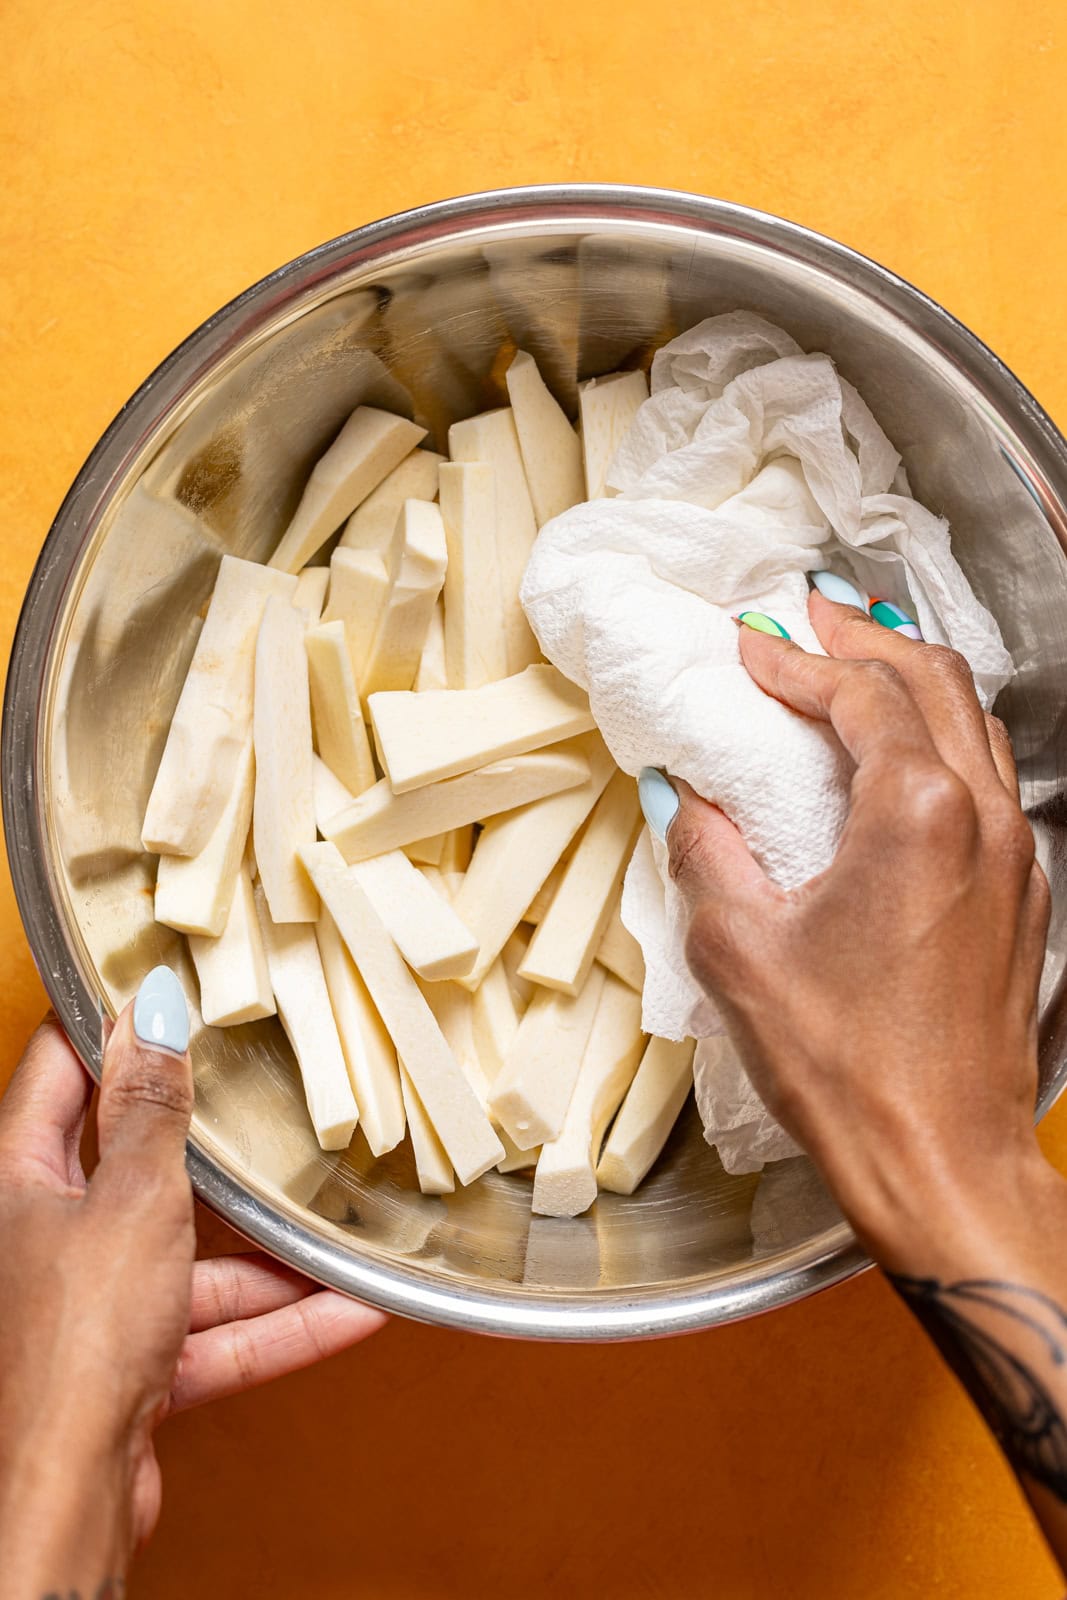 Sliced Yucca being patted dry with a paper towel in a silver bowl.